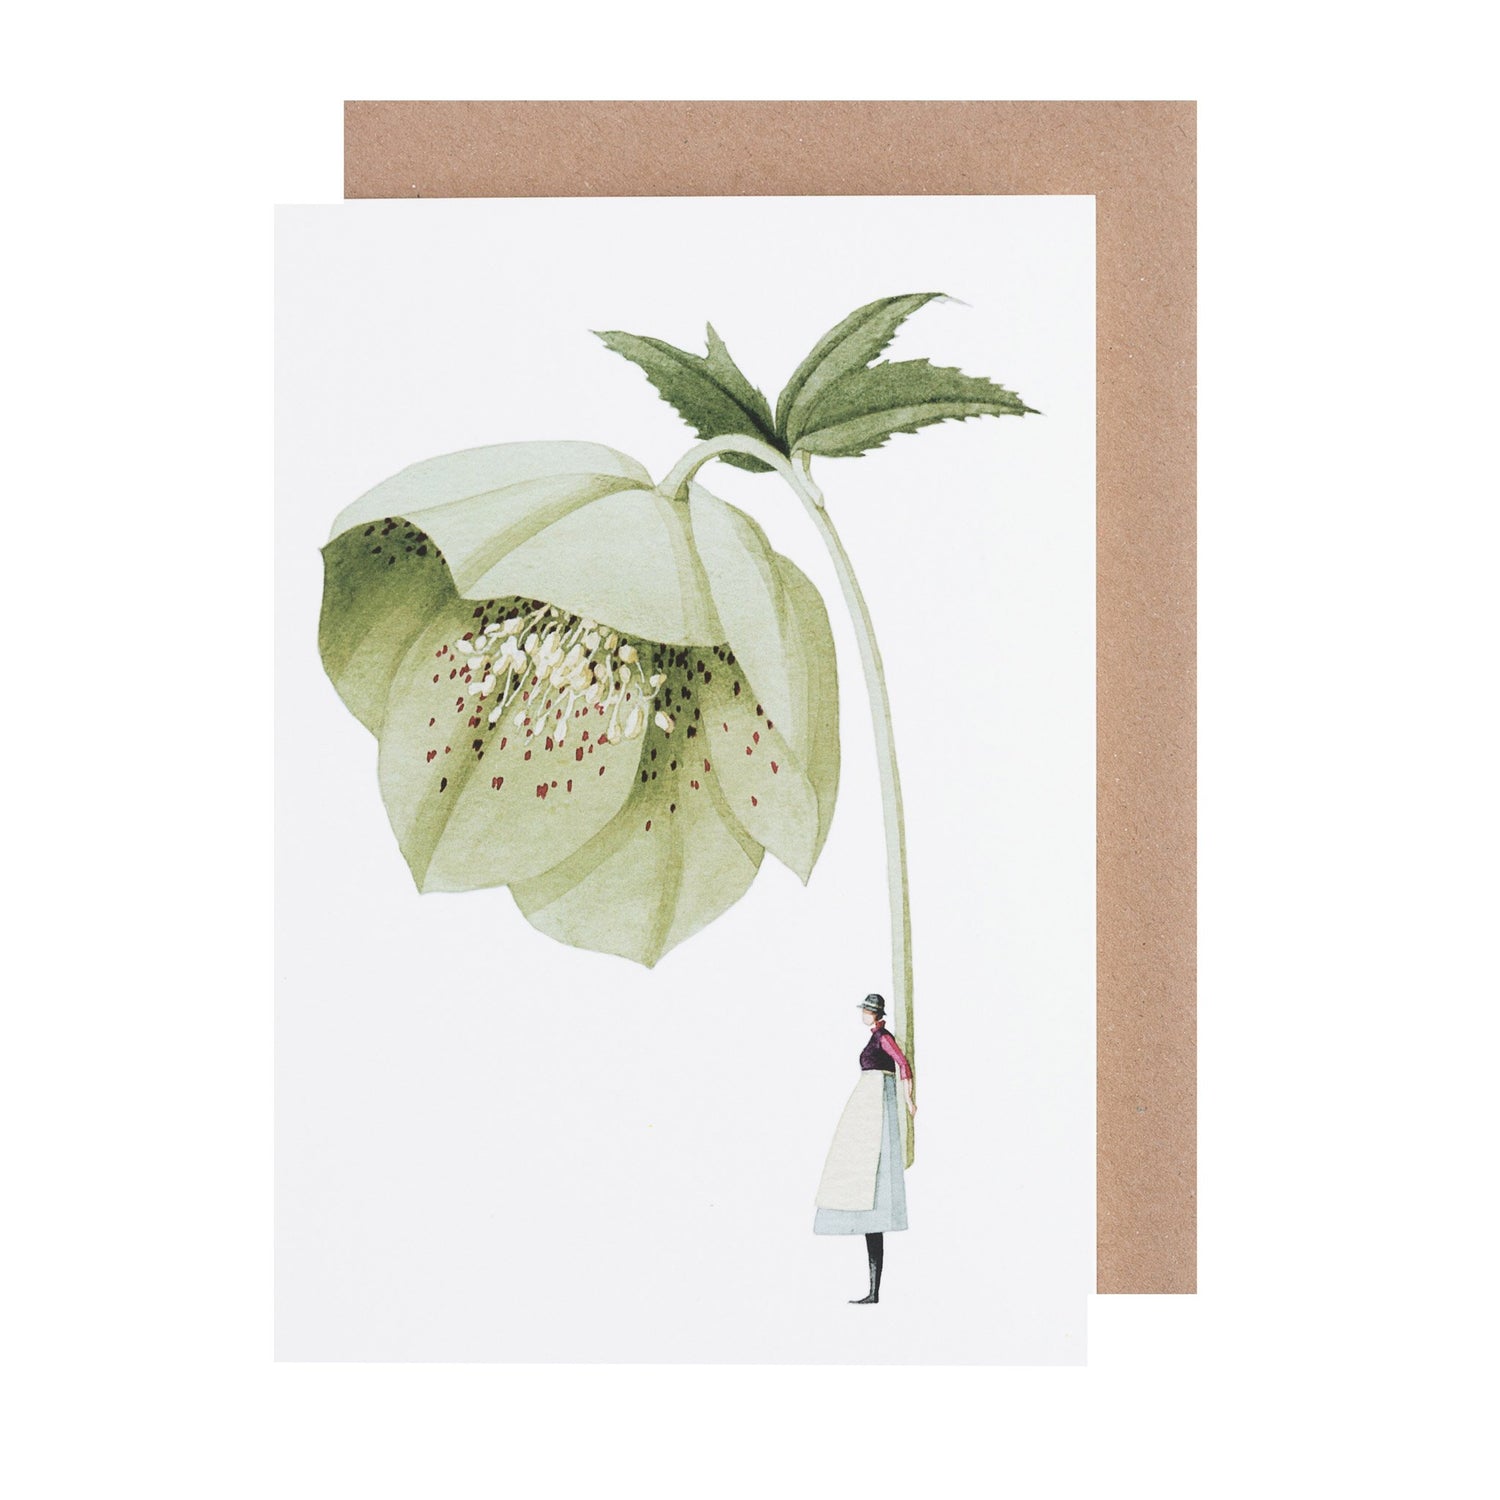 environmentally sustainable paper, compostable packaging, recycled paper, made in england, illustration, Hellebore, green flowers